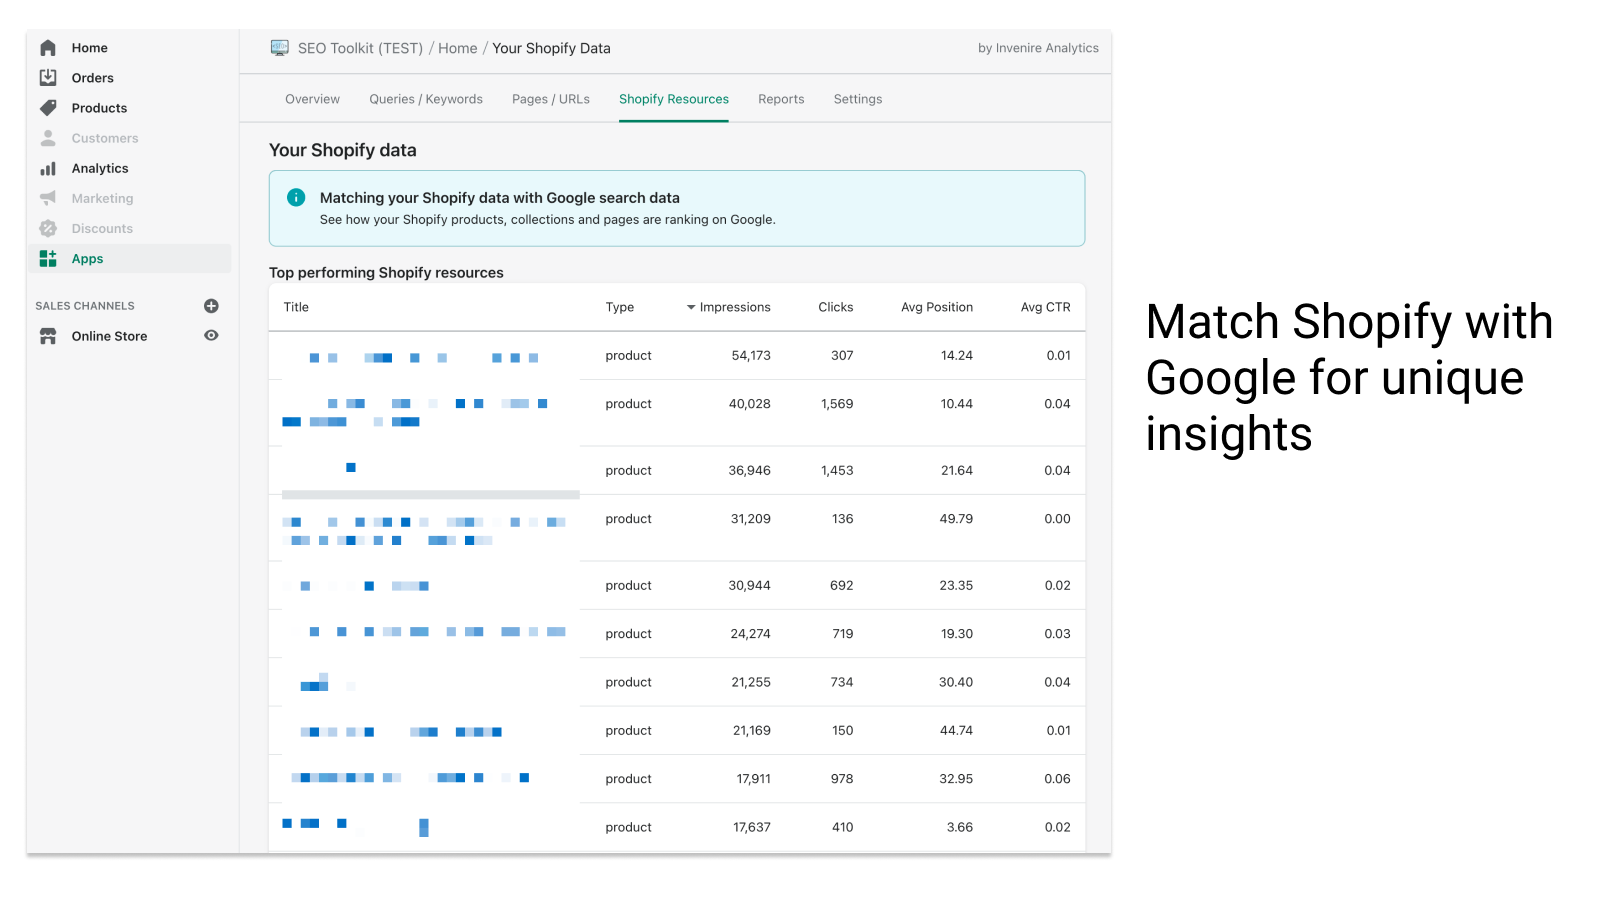 Match data from Shopify and Google for unique insights